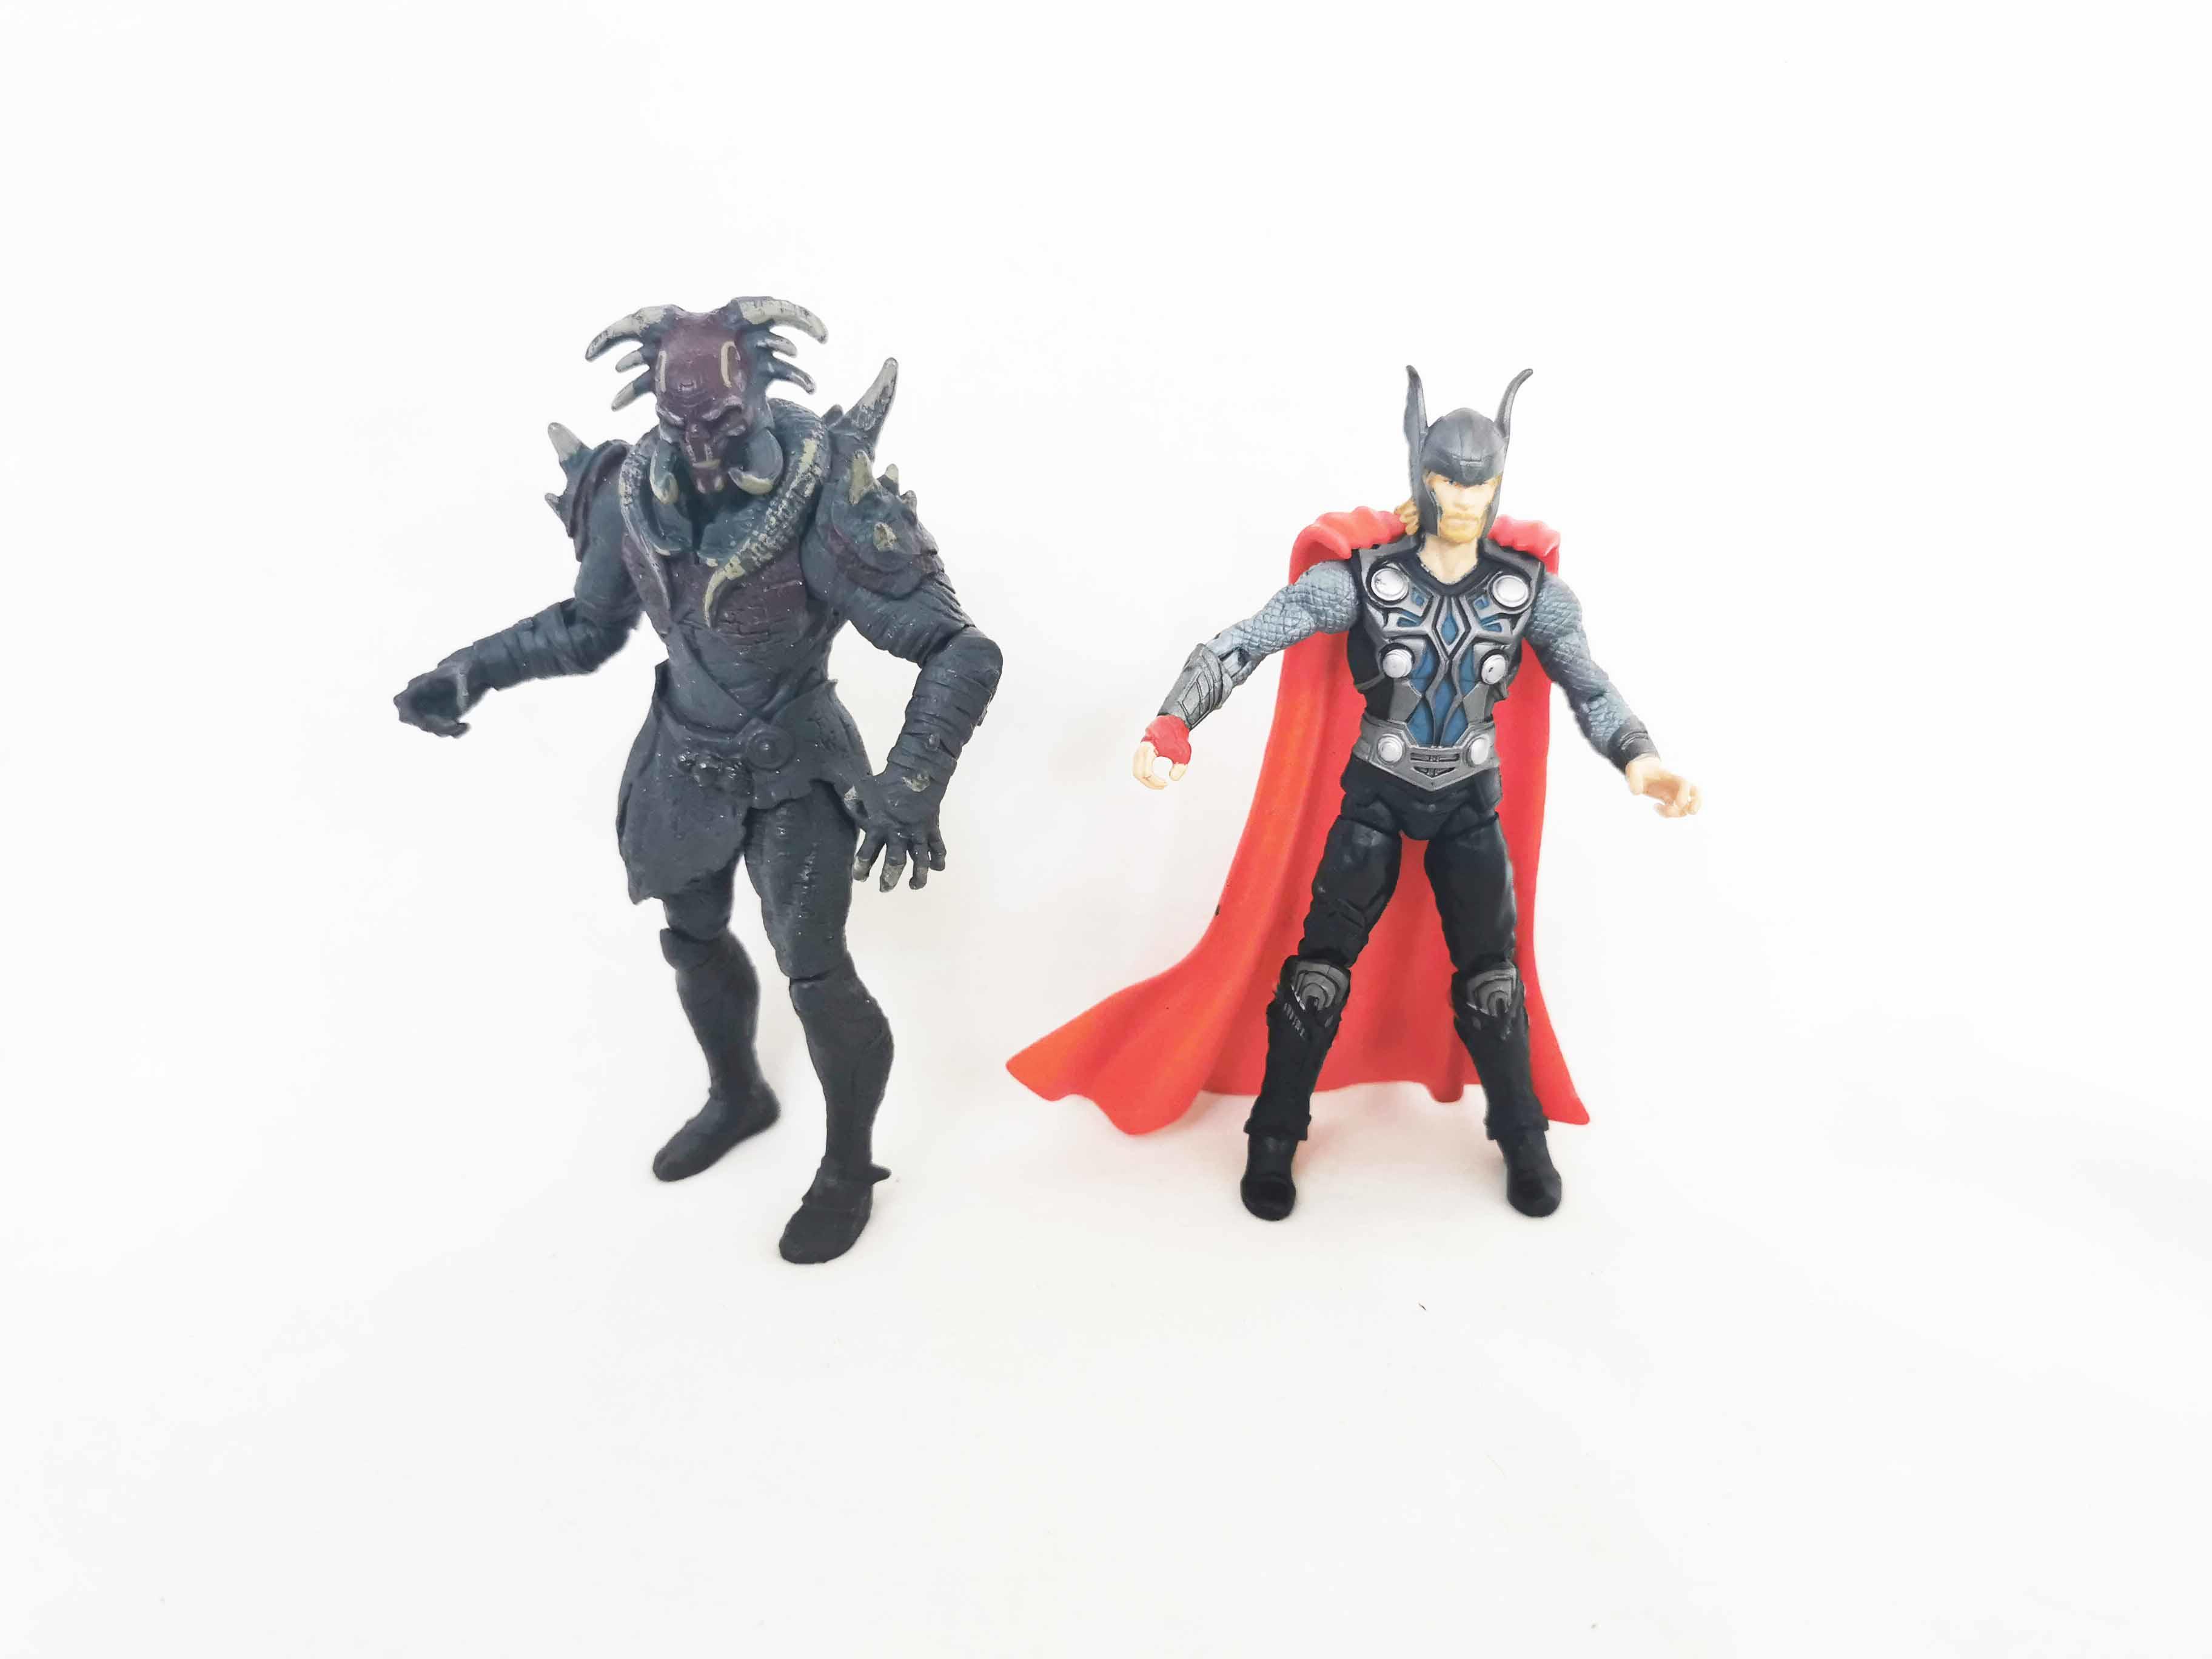 Kurse and Thor Marvel Universe Avengers Action Figures 3.75" scale Hasbro